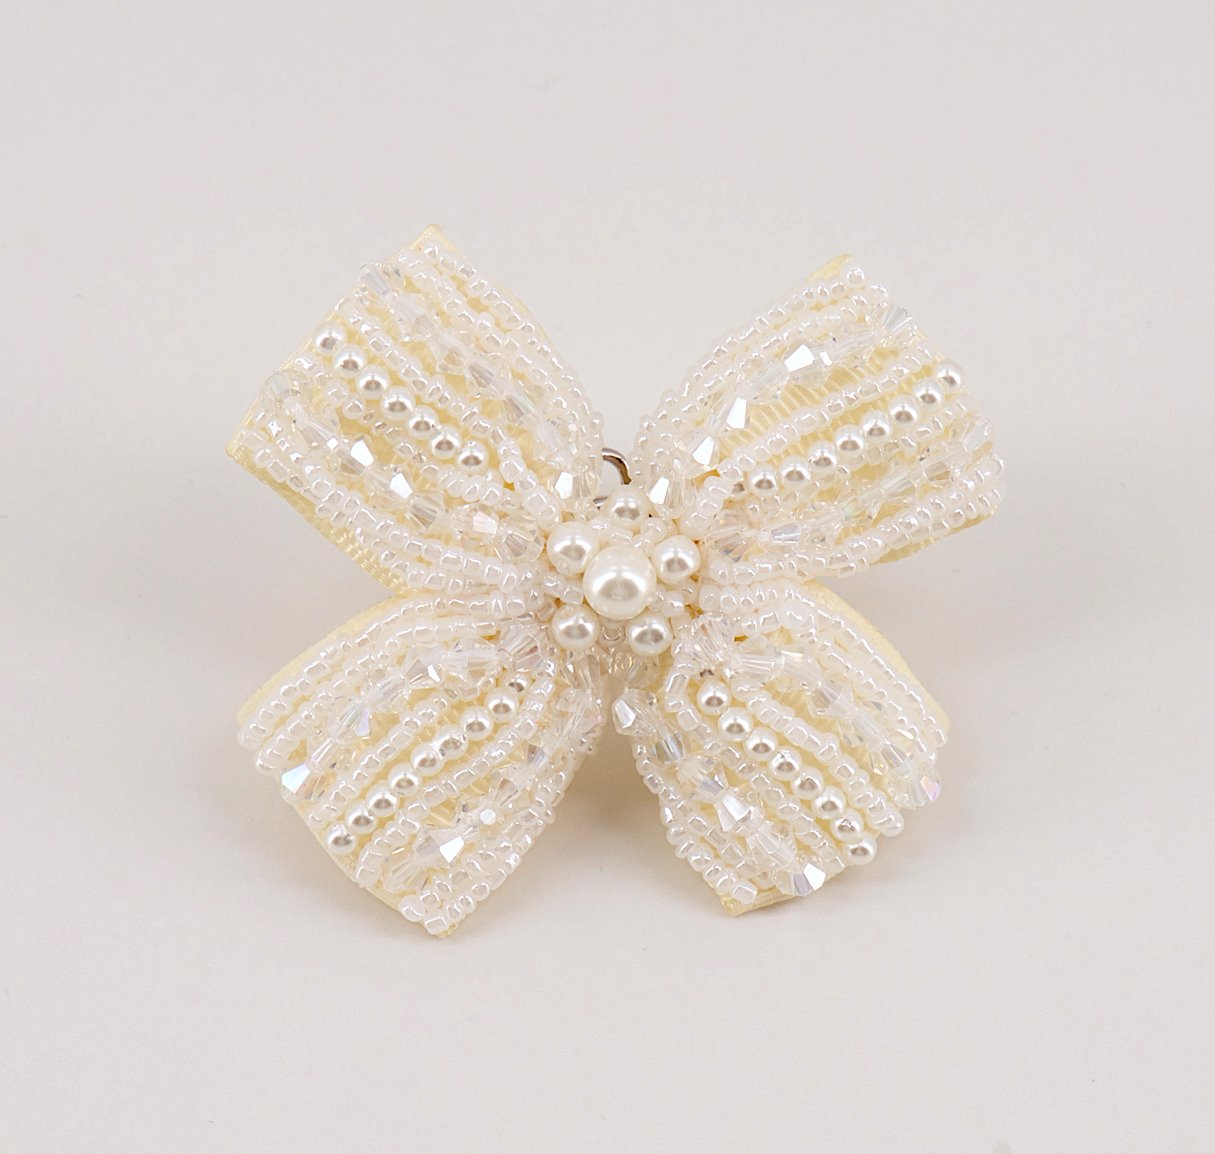 The Nought's & Crosses Pearl Designer Hair Bow – The Girls @ Los Altos